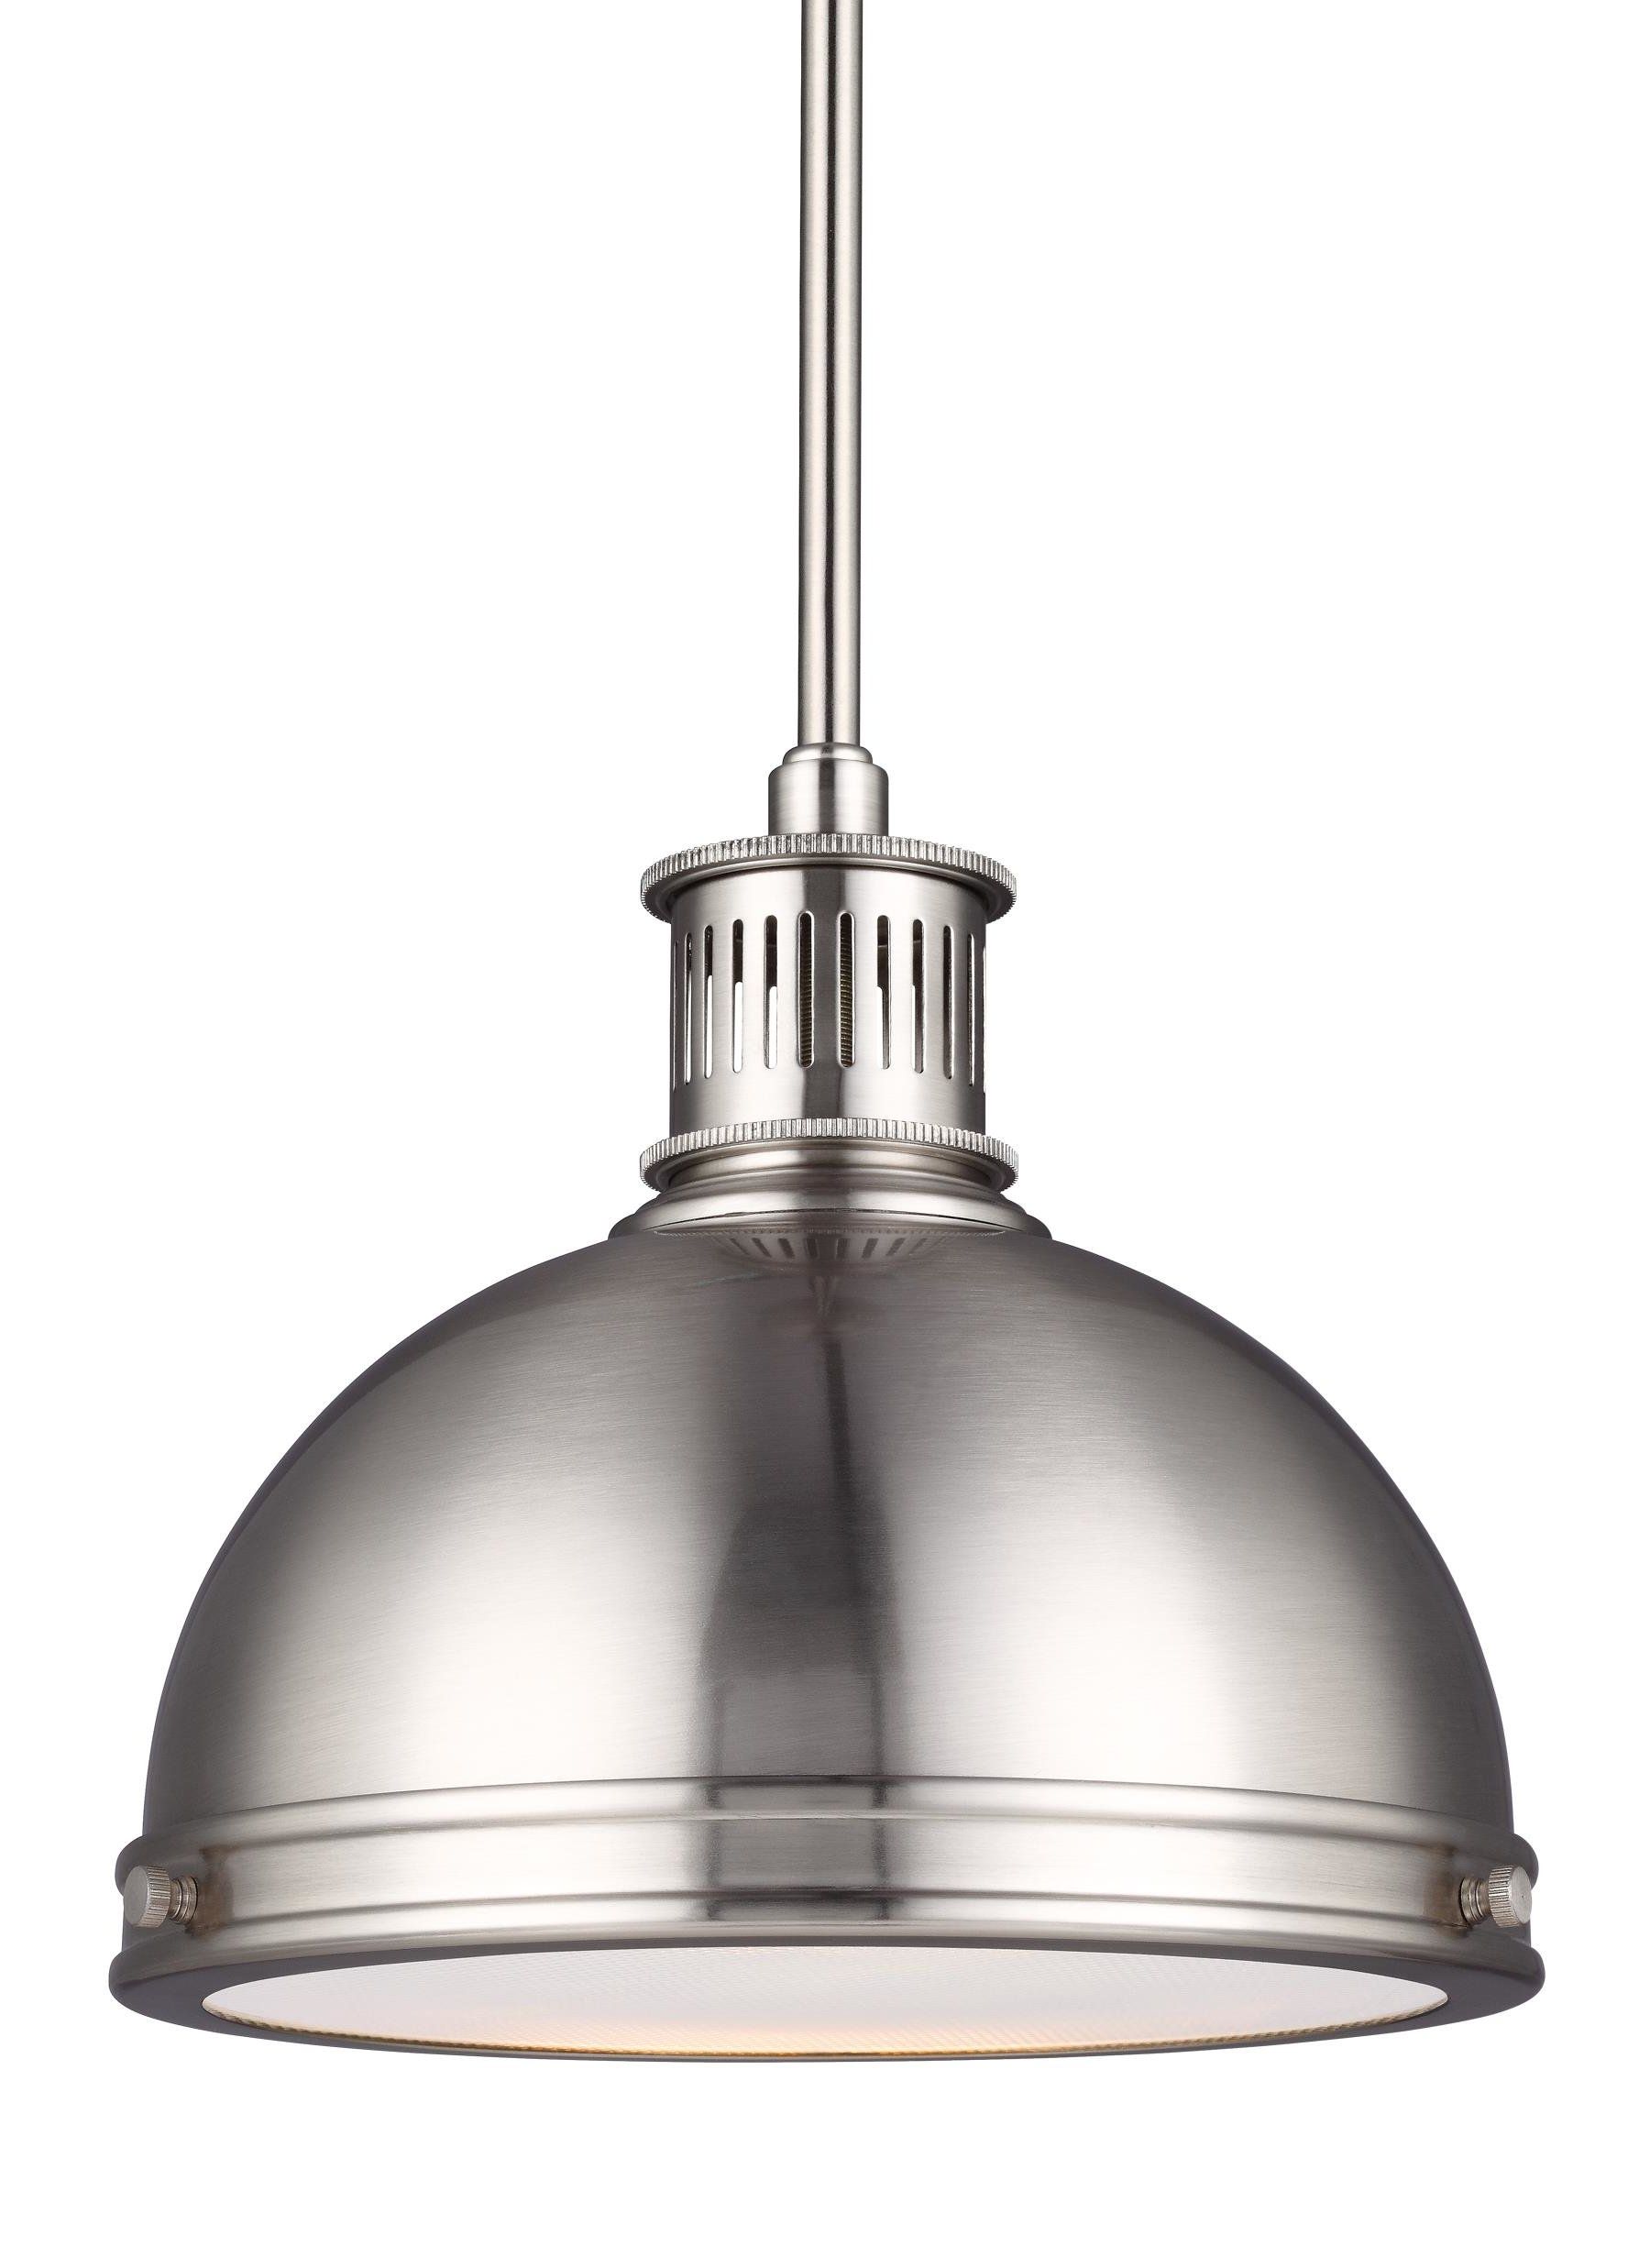 Current Amara 2 Light Dome Pendants Intended For Orchard Hill 1 Light Led Dome Pendant (View 15 of 20)